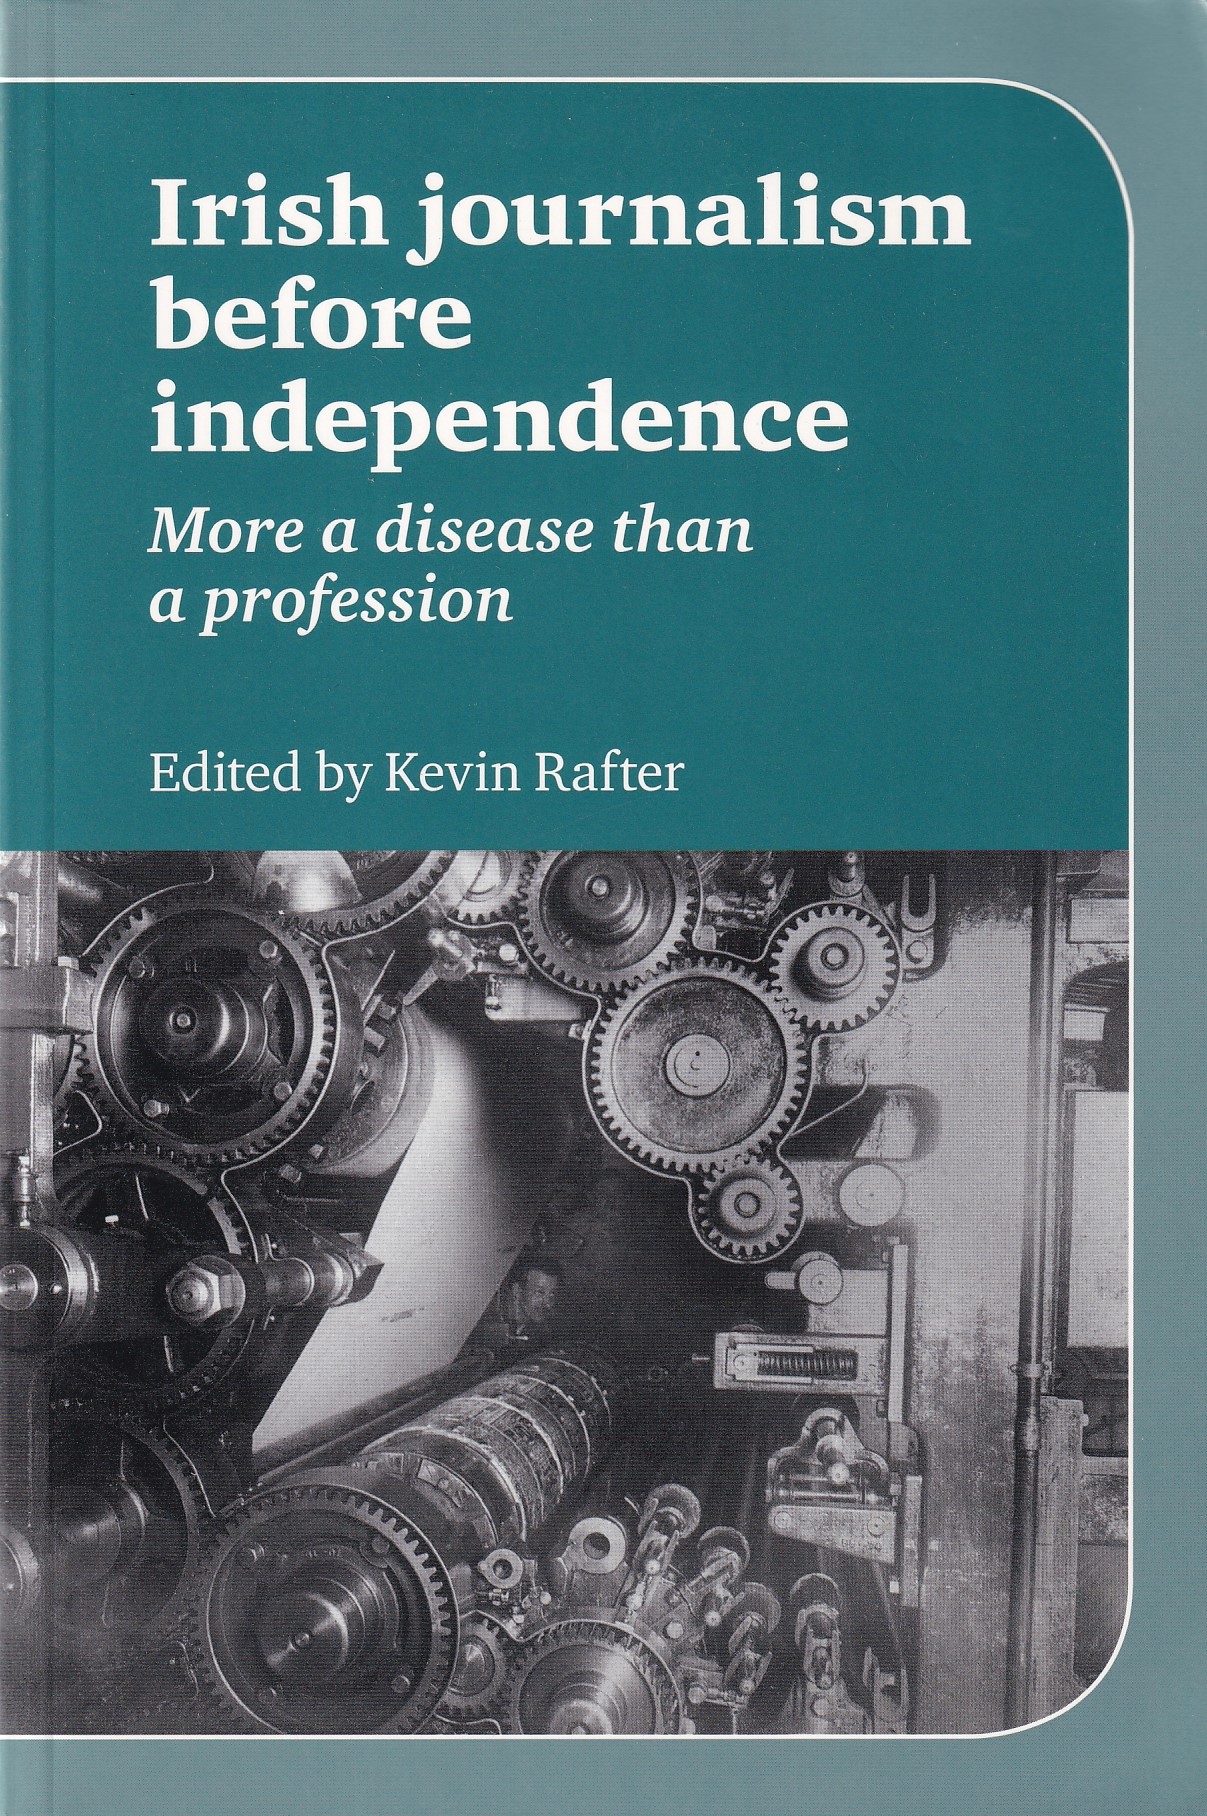 Irish Journalism Before Independence: More a disease than a profession | Rafter, Kevin ed. | Charlie Byrne's